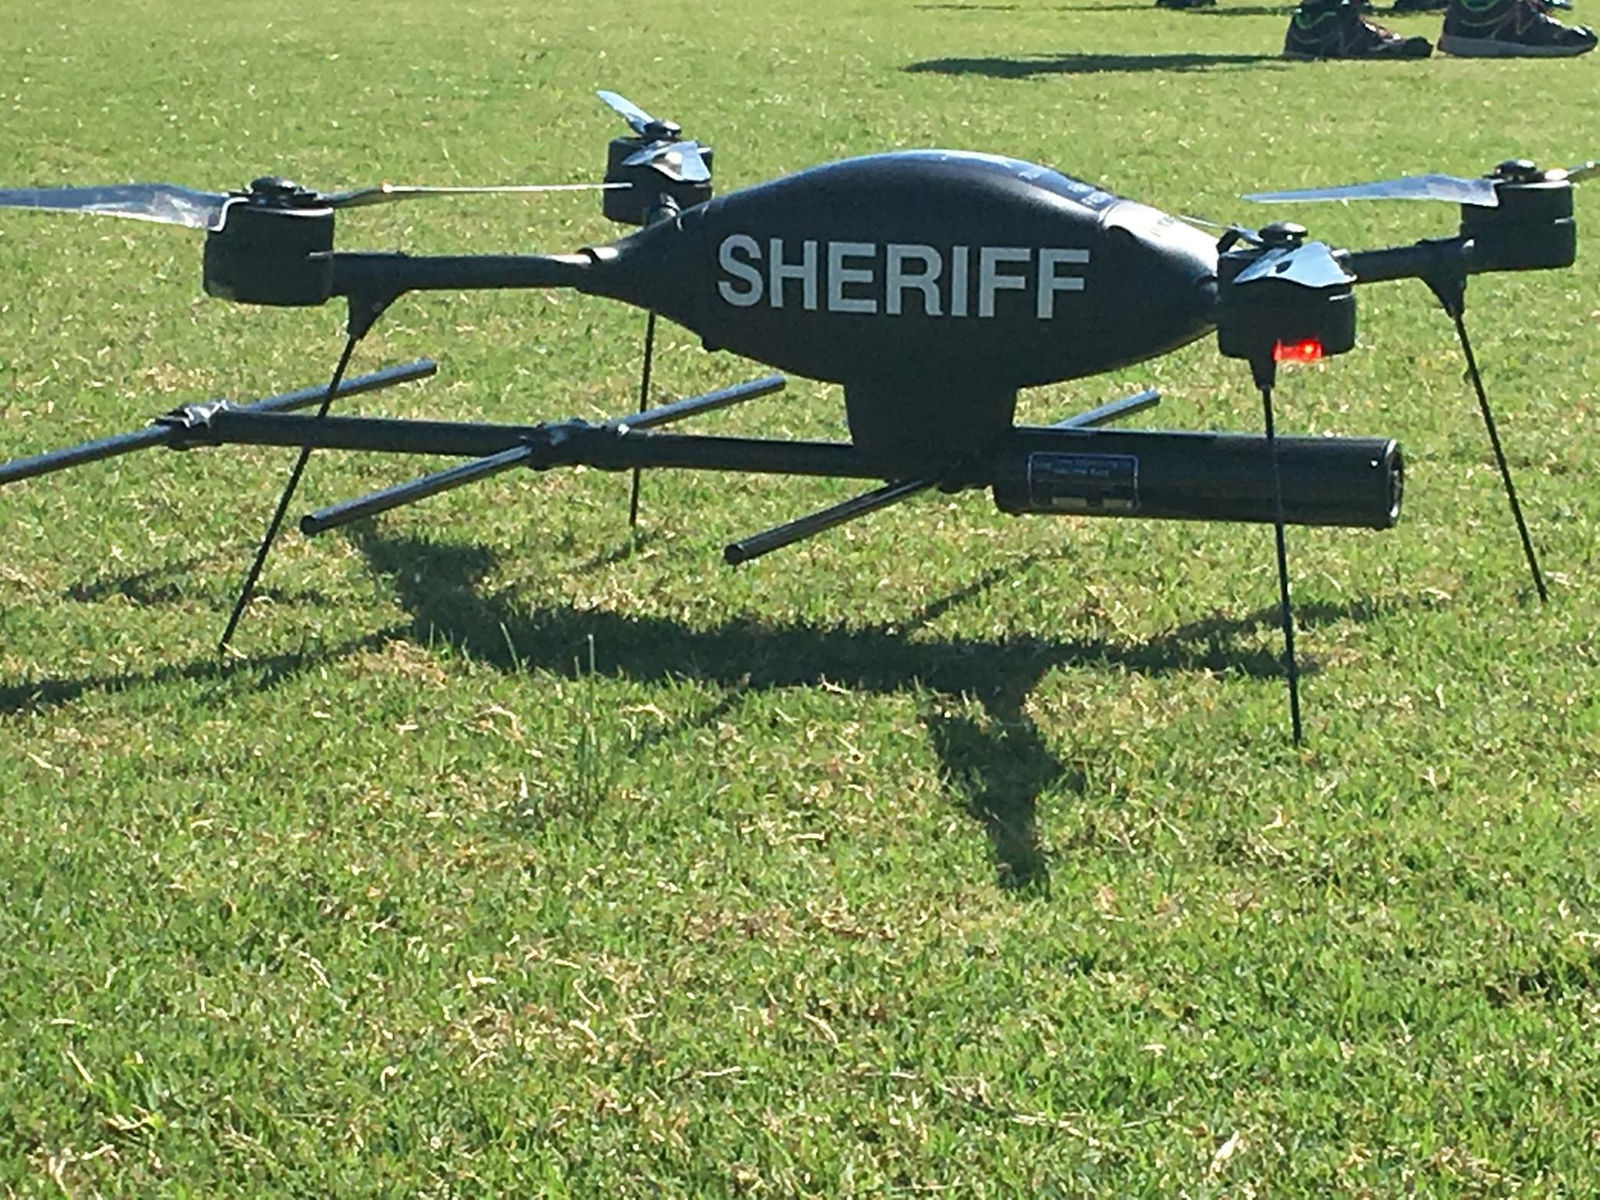 The drone has features not found on drones available for commercial purchase, including infrared video for finding someone during night time hours. (Courtesy Loudoun County Sheriff's Office)